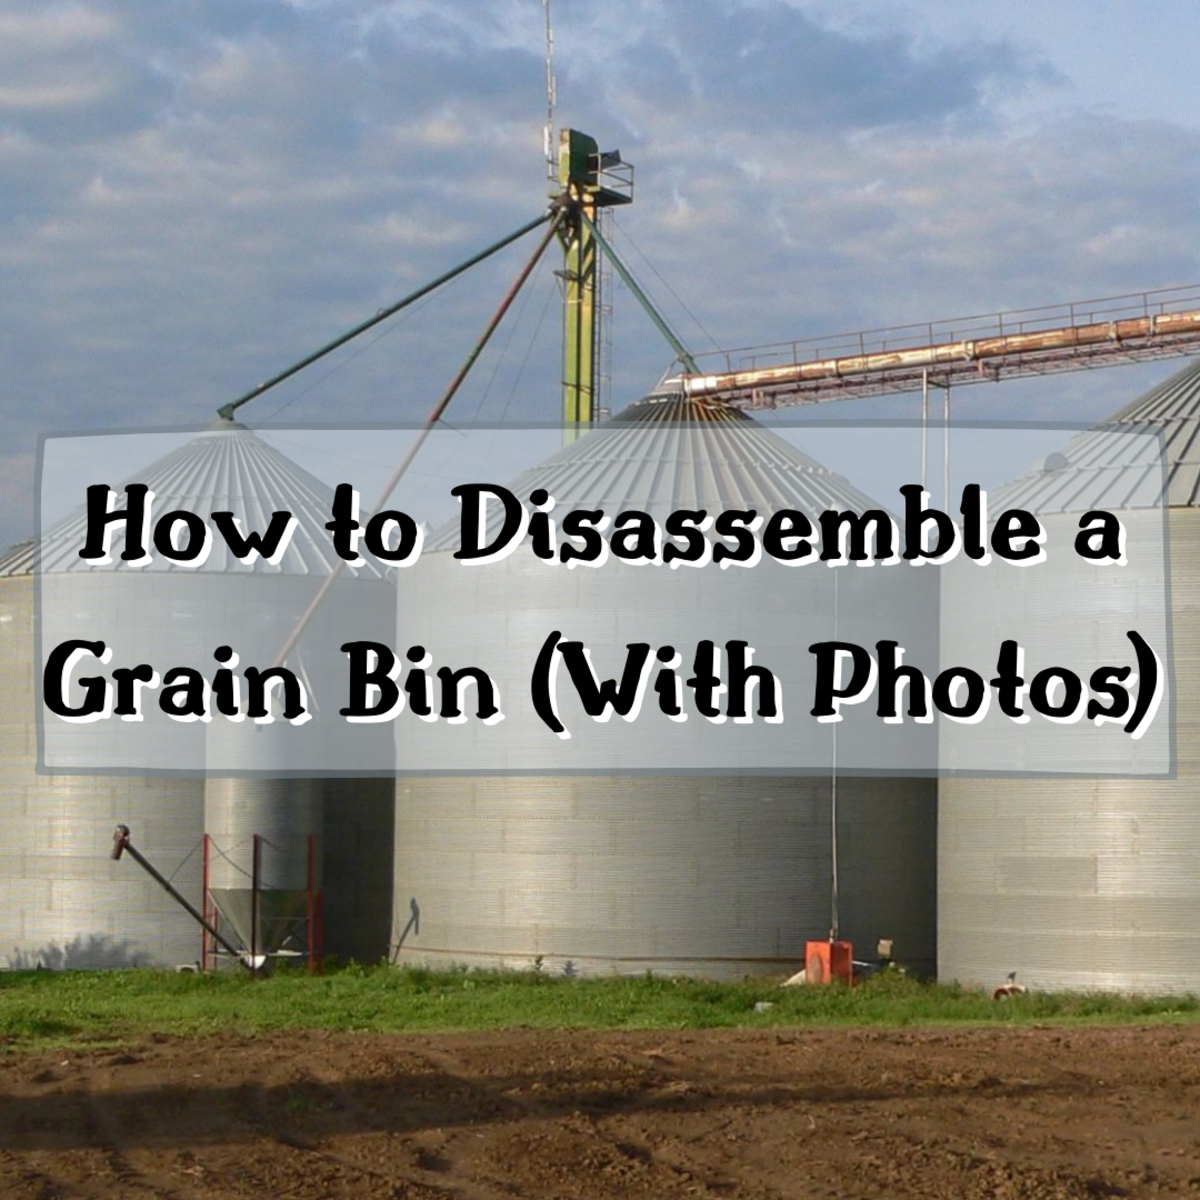 How to Disassemble a Grain Bin: Picture Tutorial